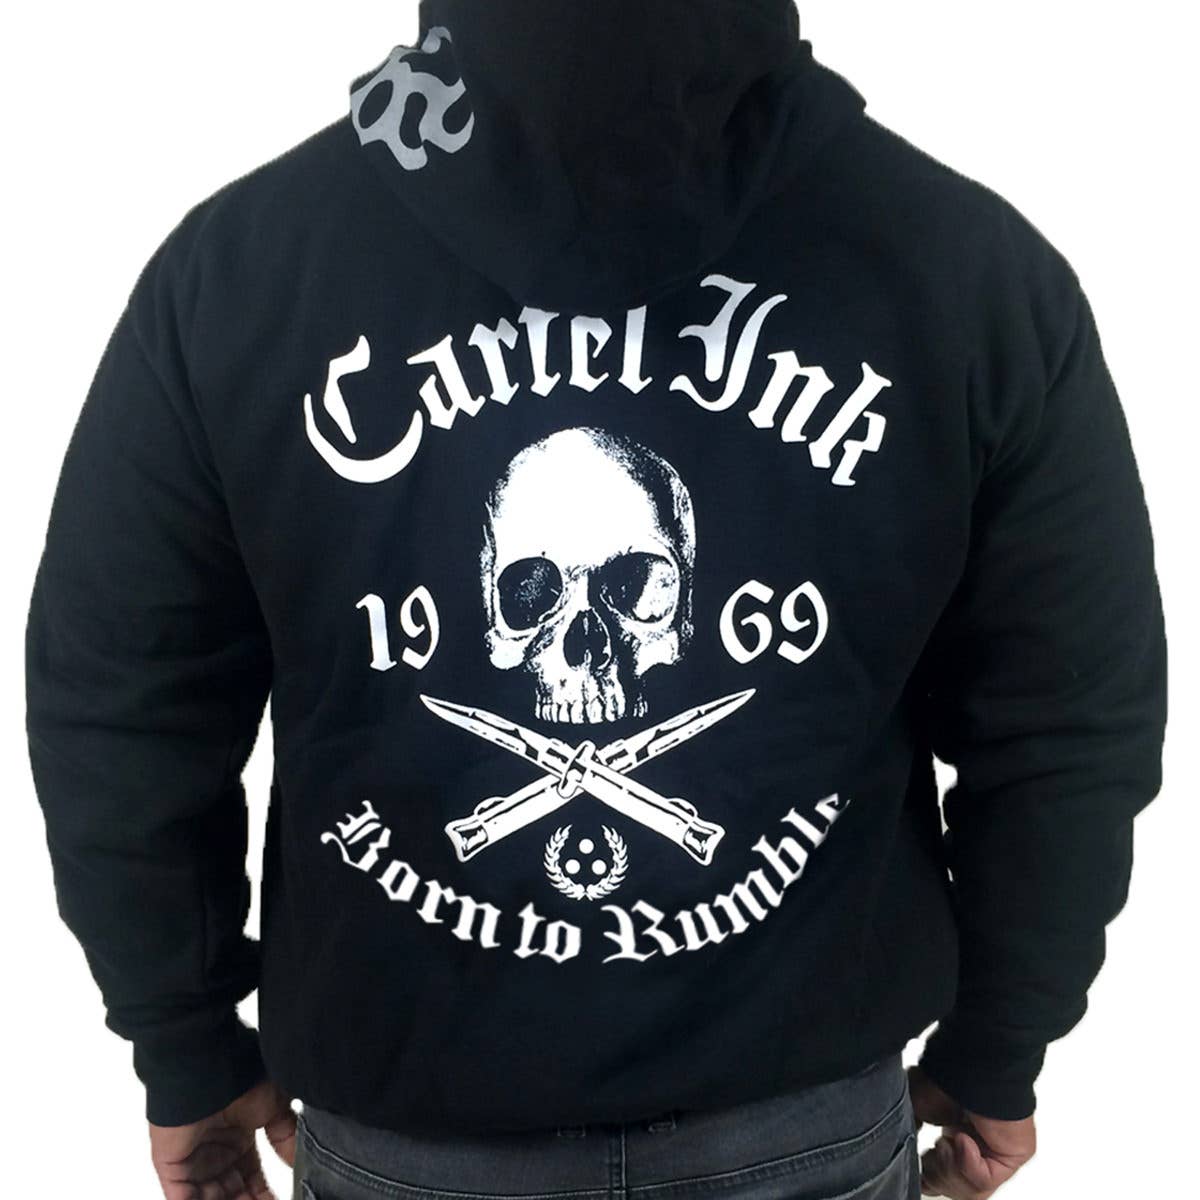 Cartel Ink - Cartel Ink Born To Rumble (Knuckles): Black White / 2XL - - Synik Clothing - synikclothing.com